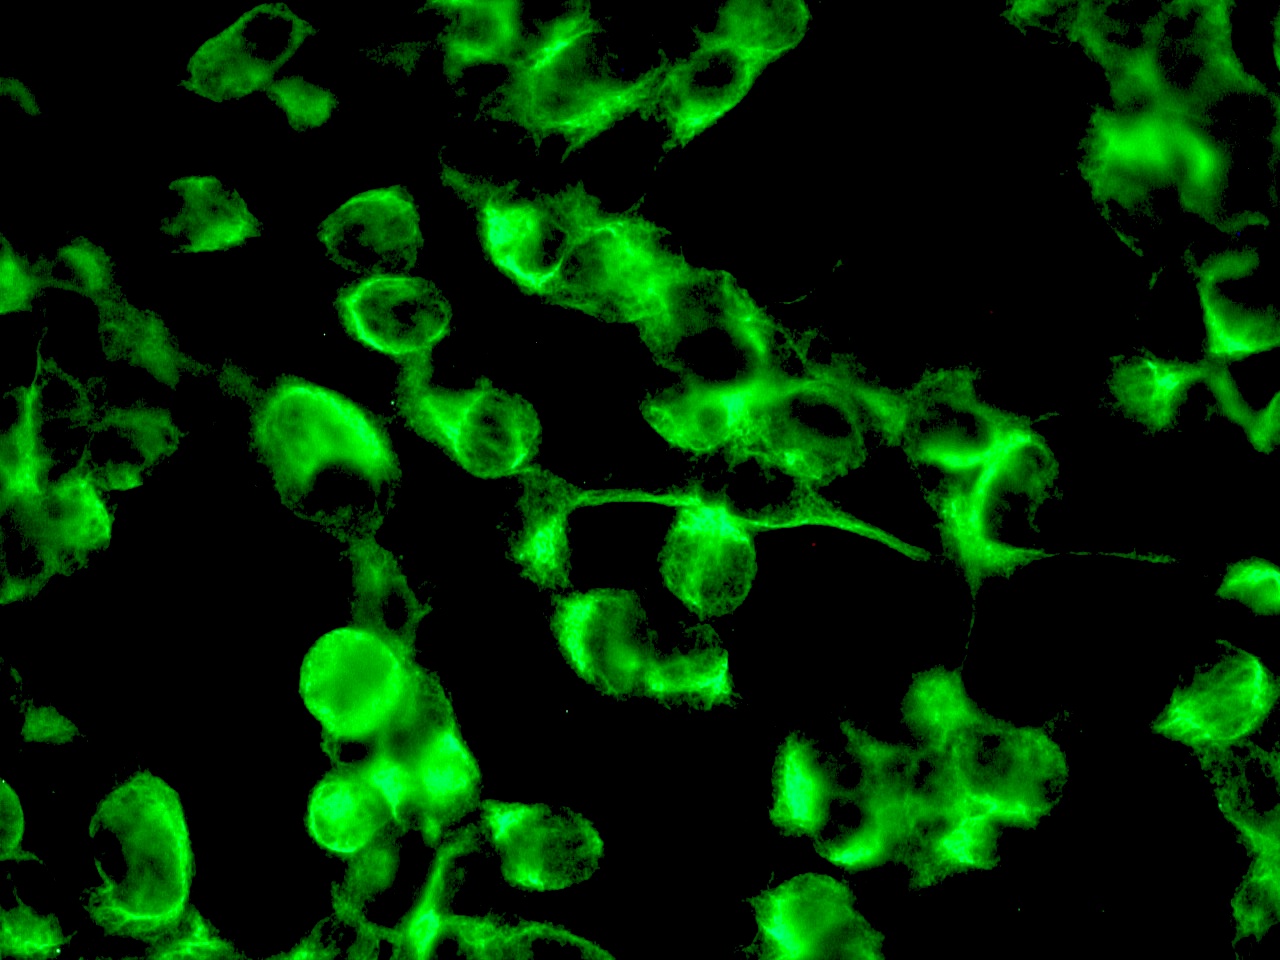 Figure 3 Immunostaining of intracellular nestin filaments in cultured SH-SY-5Y neuronal cells using MUB1302P (1:100 dilution).